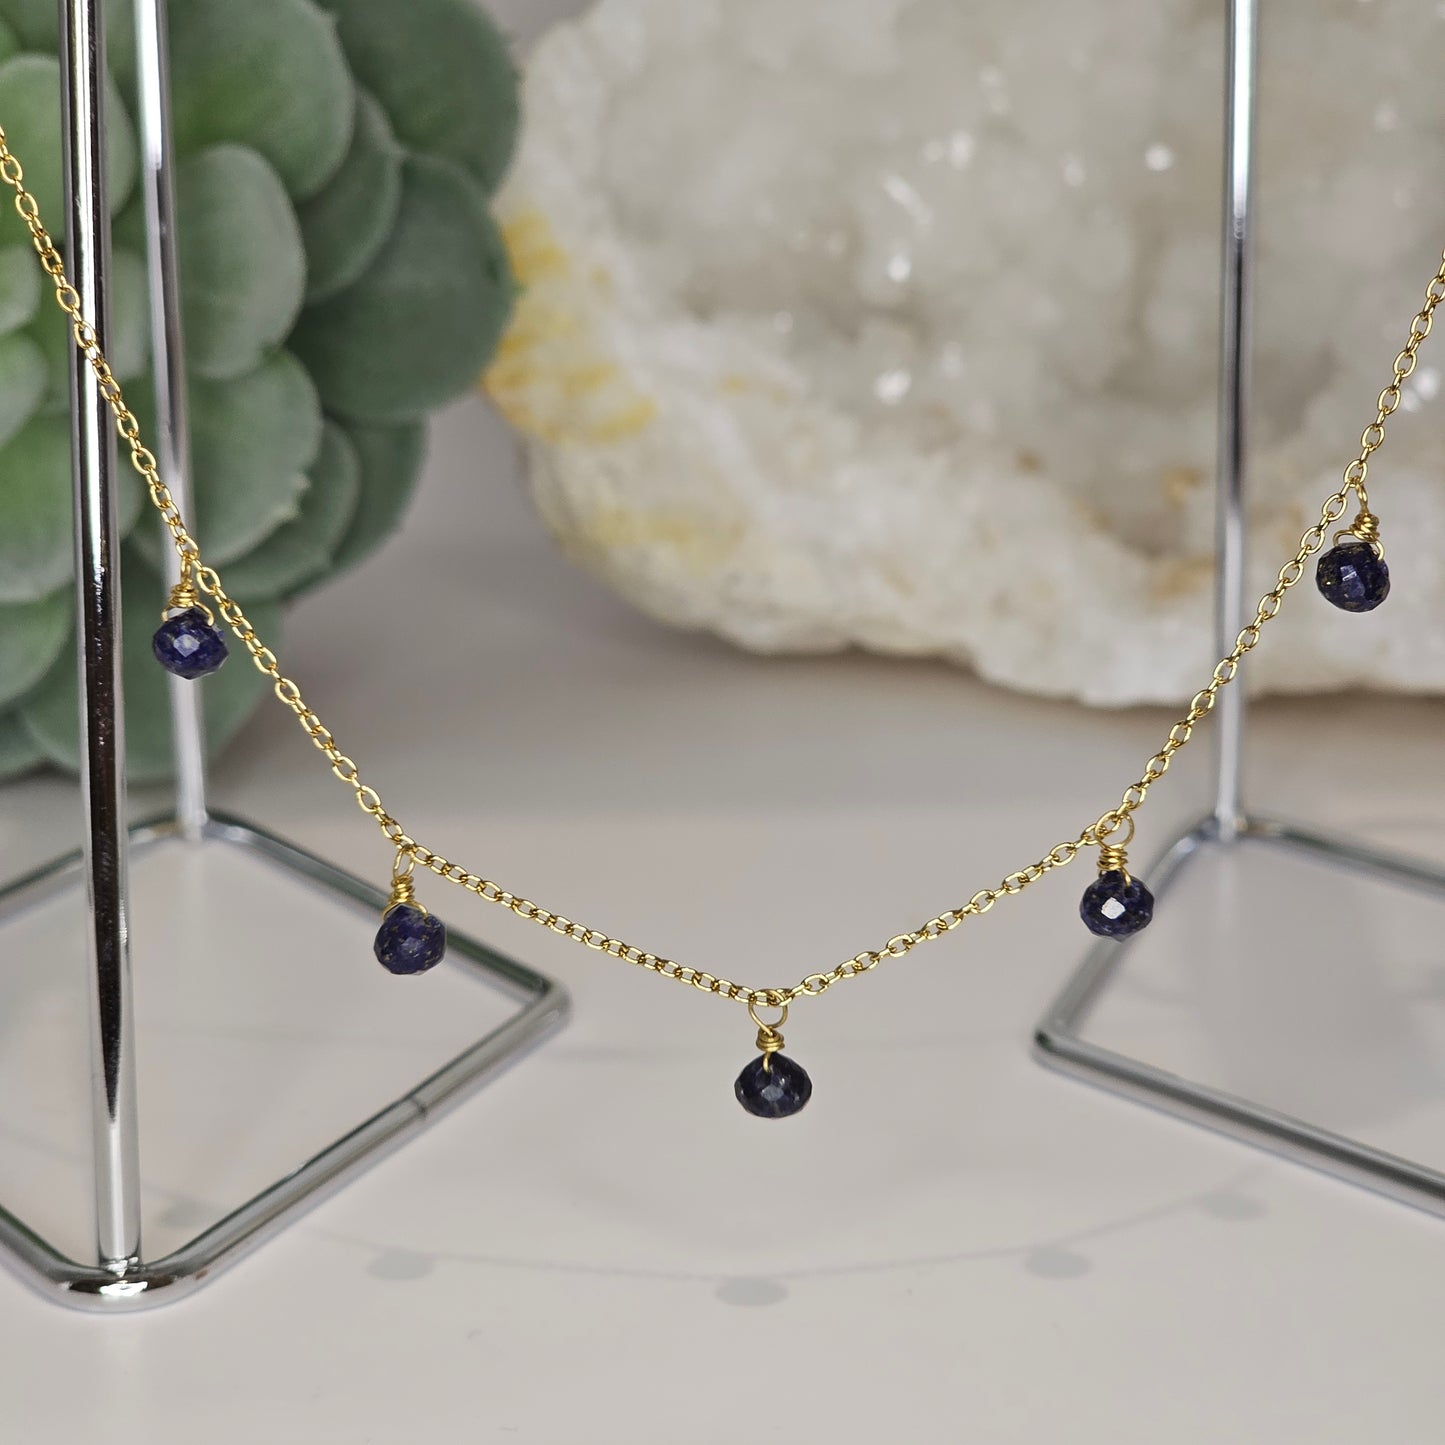 Fine gold toned stainless steel chain adorned with five dainty Lapis Lazuli beads.